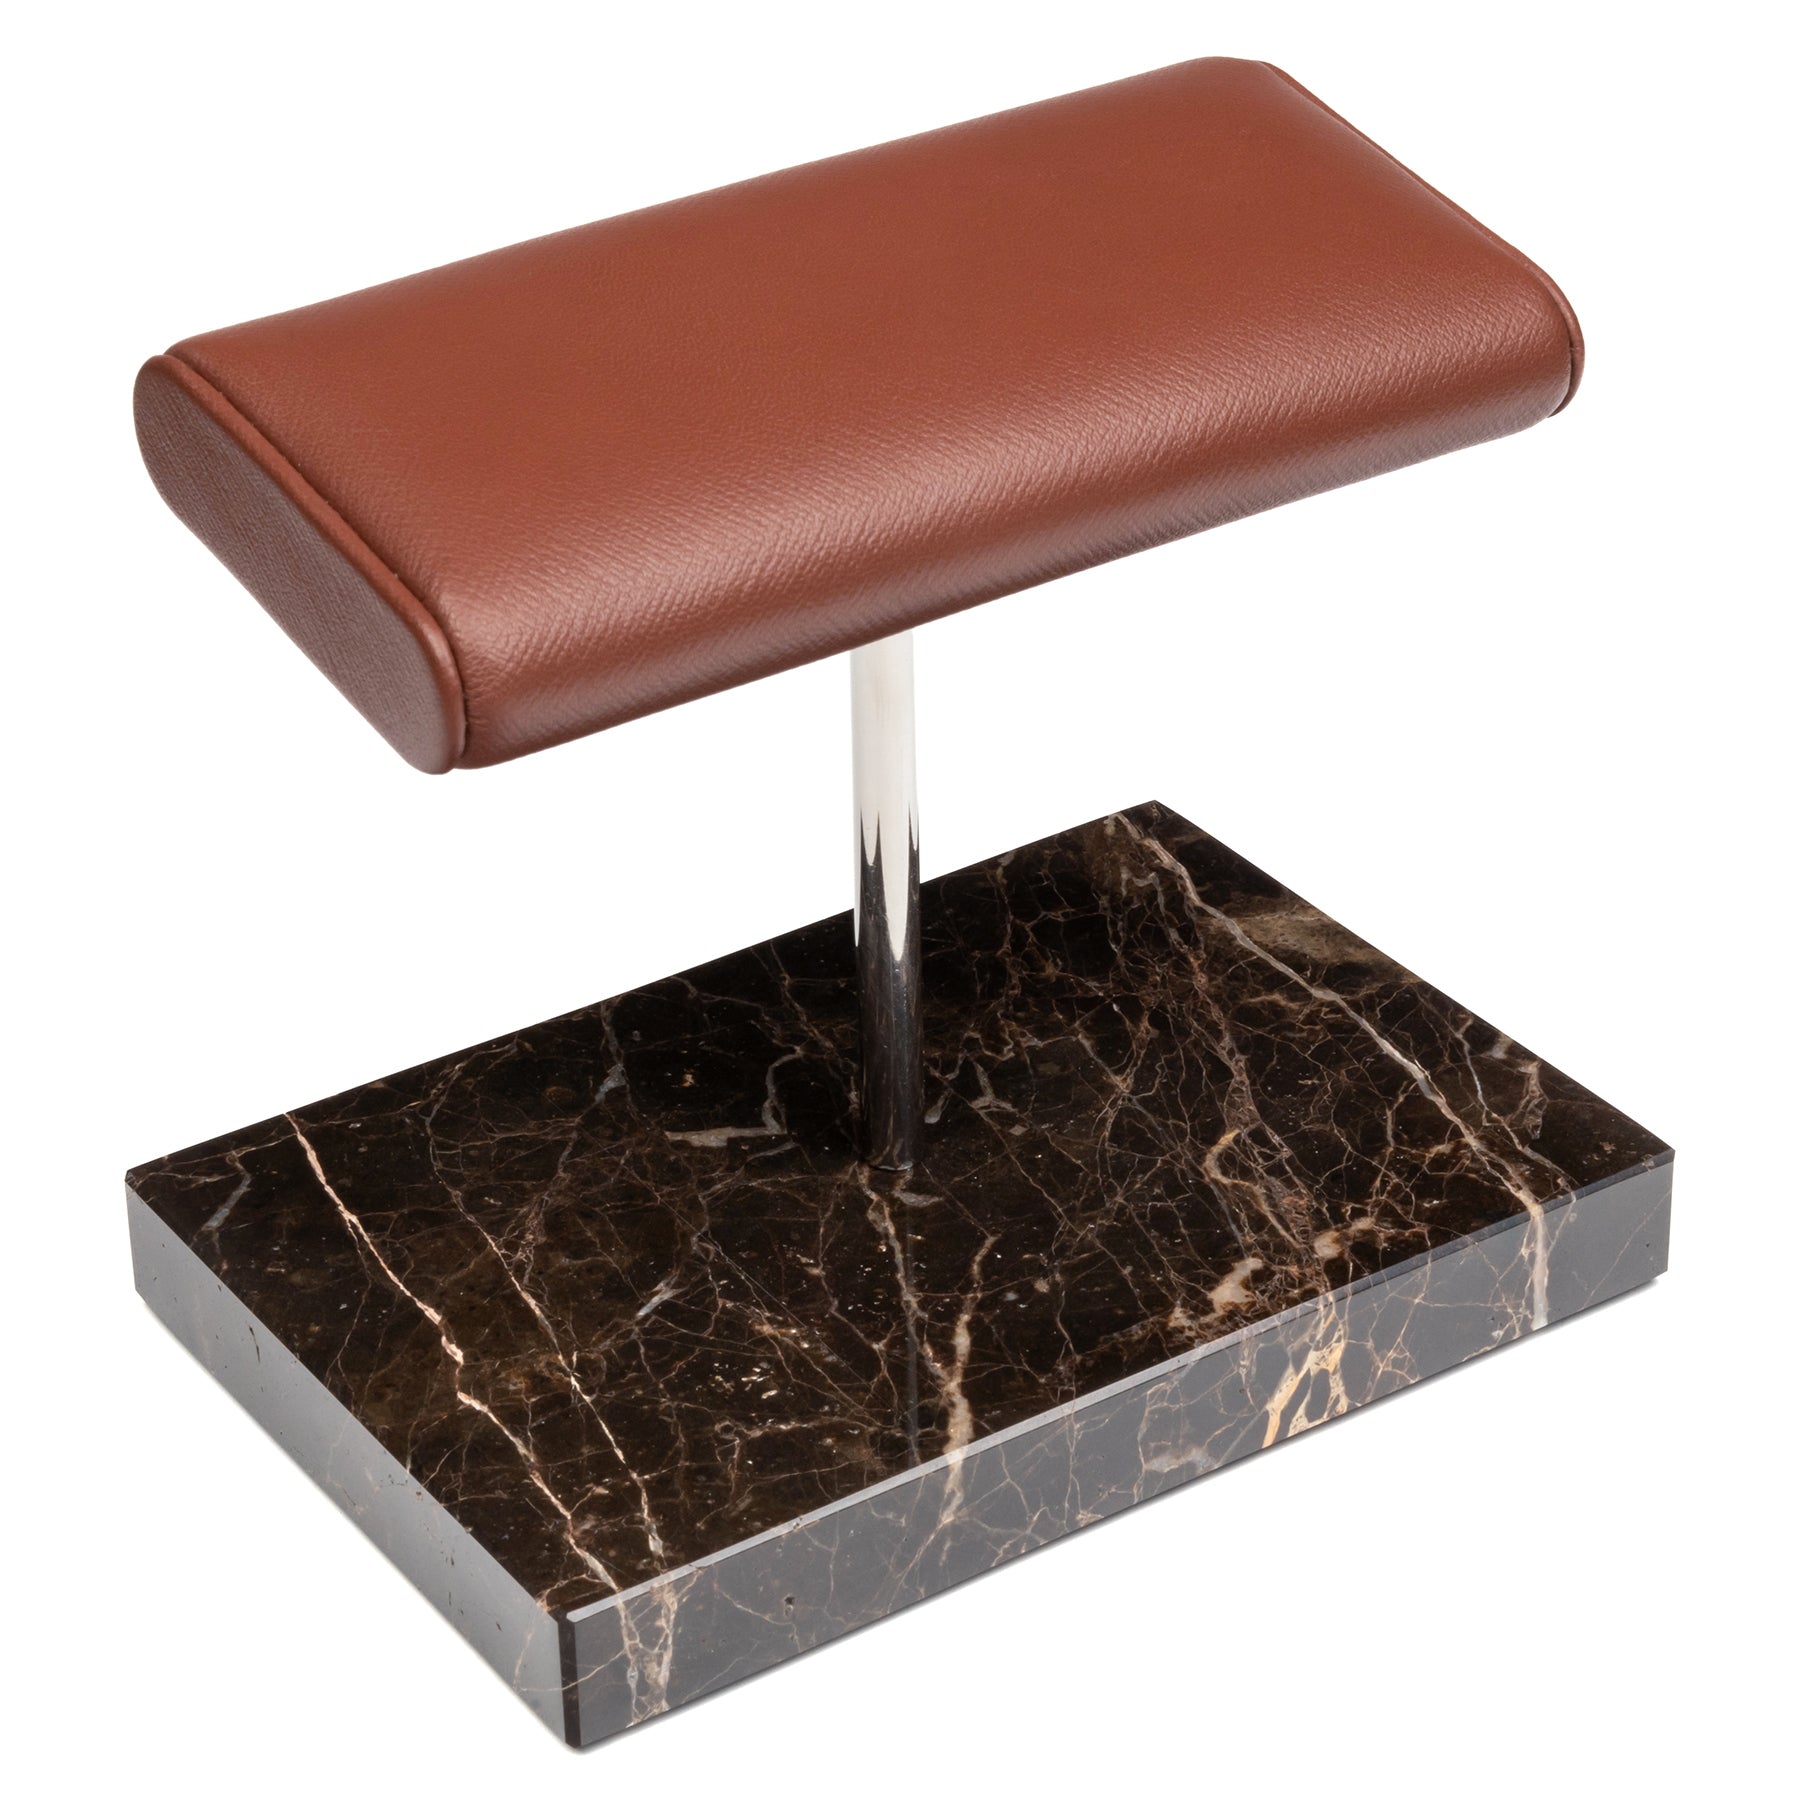 WATCH STAND CLASSIC - DOUBLE - BROWN & BROWN SAFFIANO